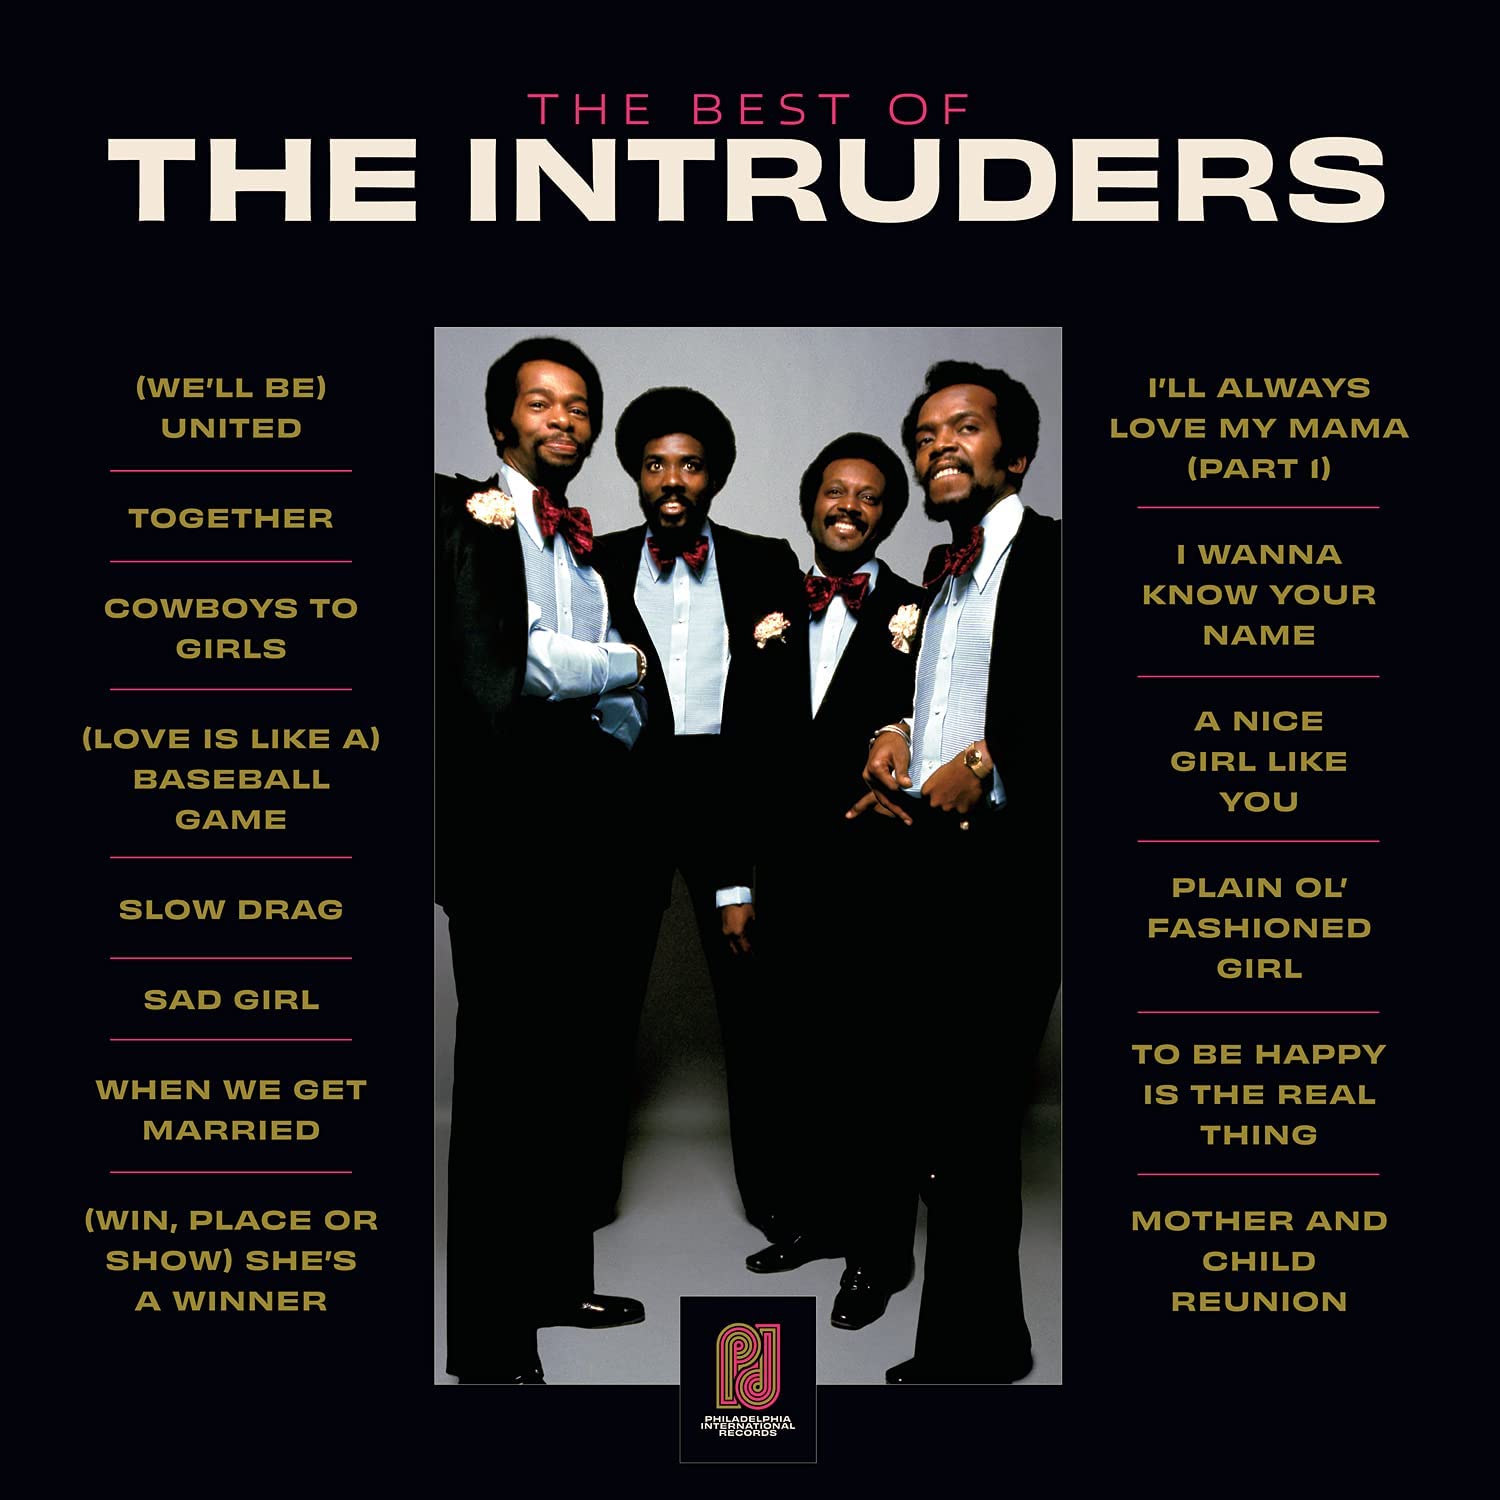 The Intruders: The Best Of The Intruders (Vinyl LP)